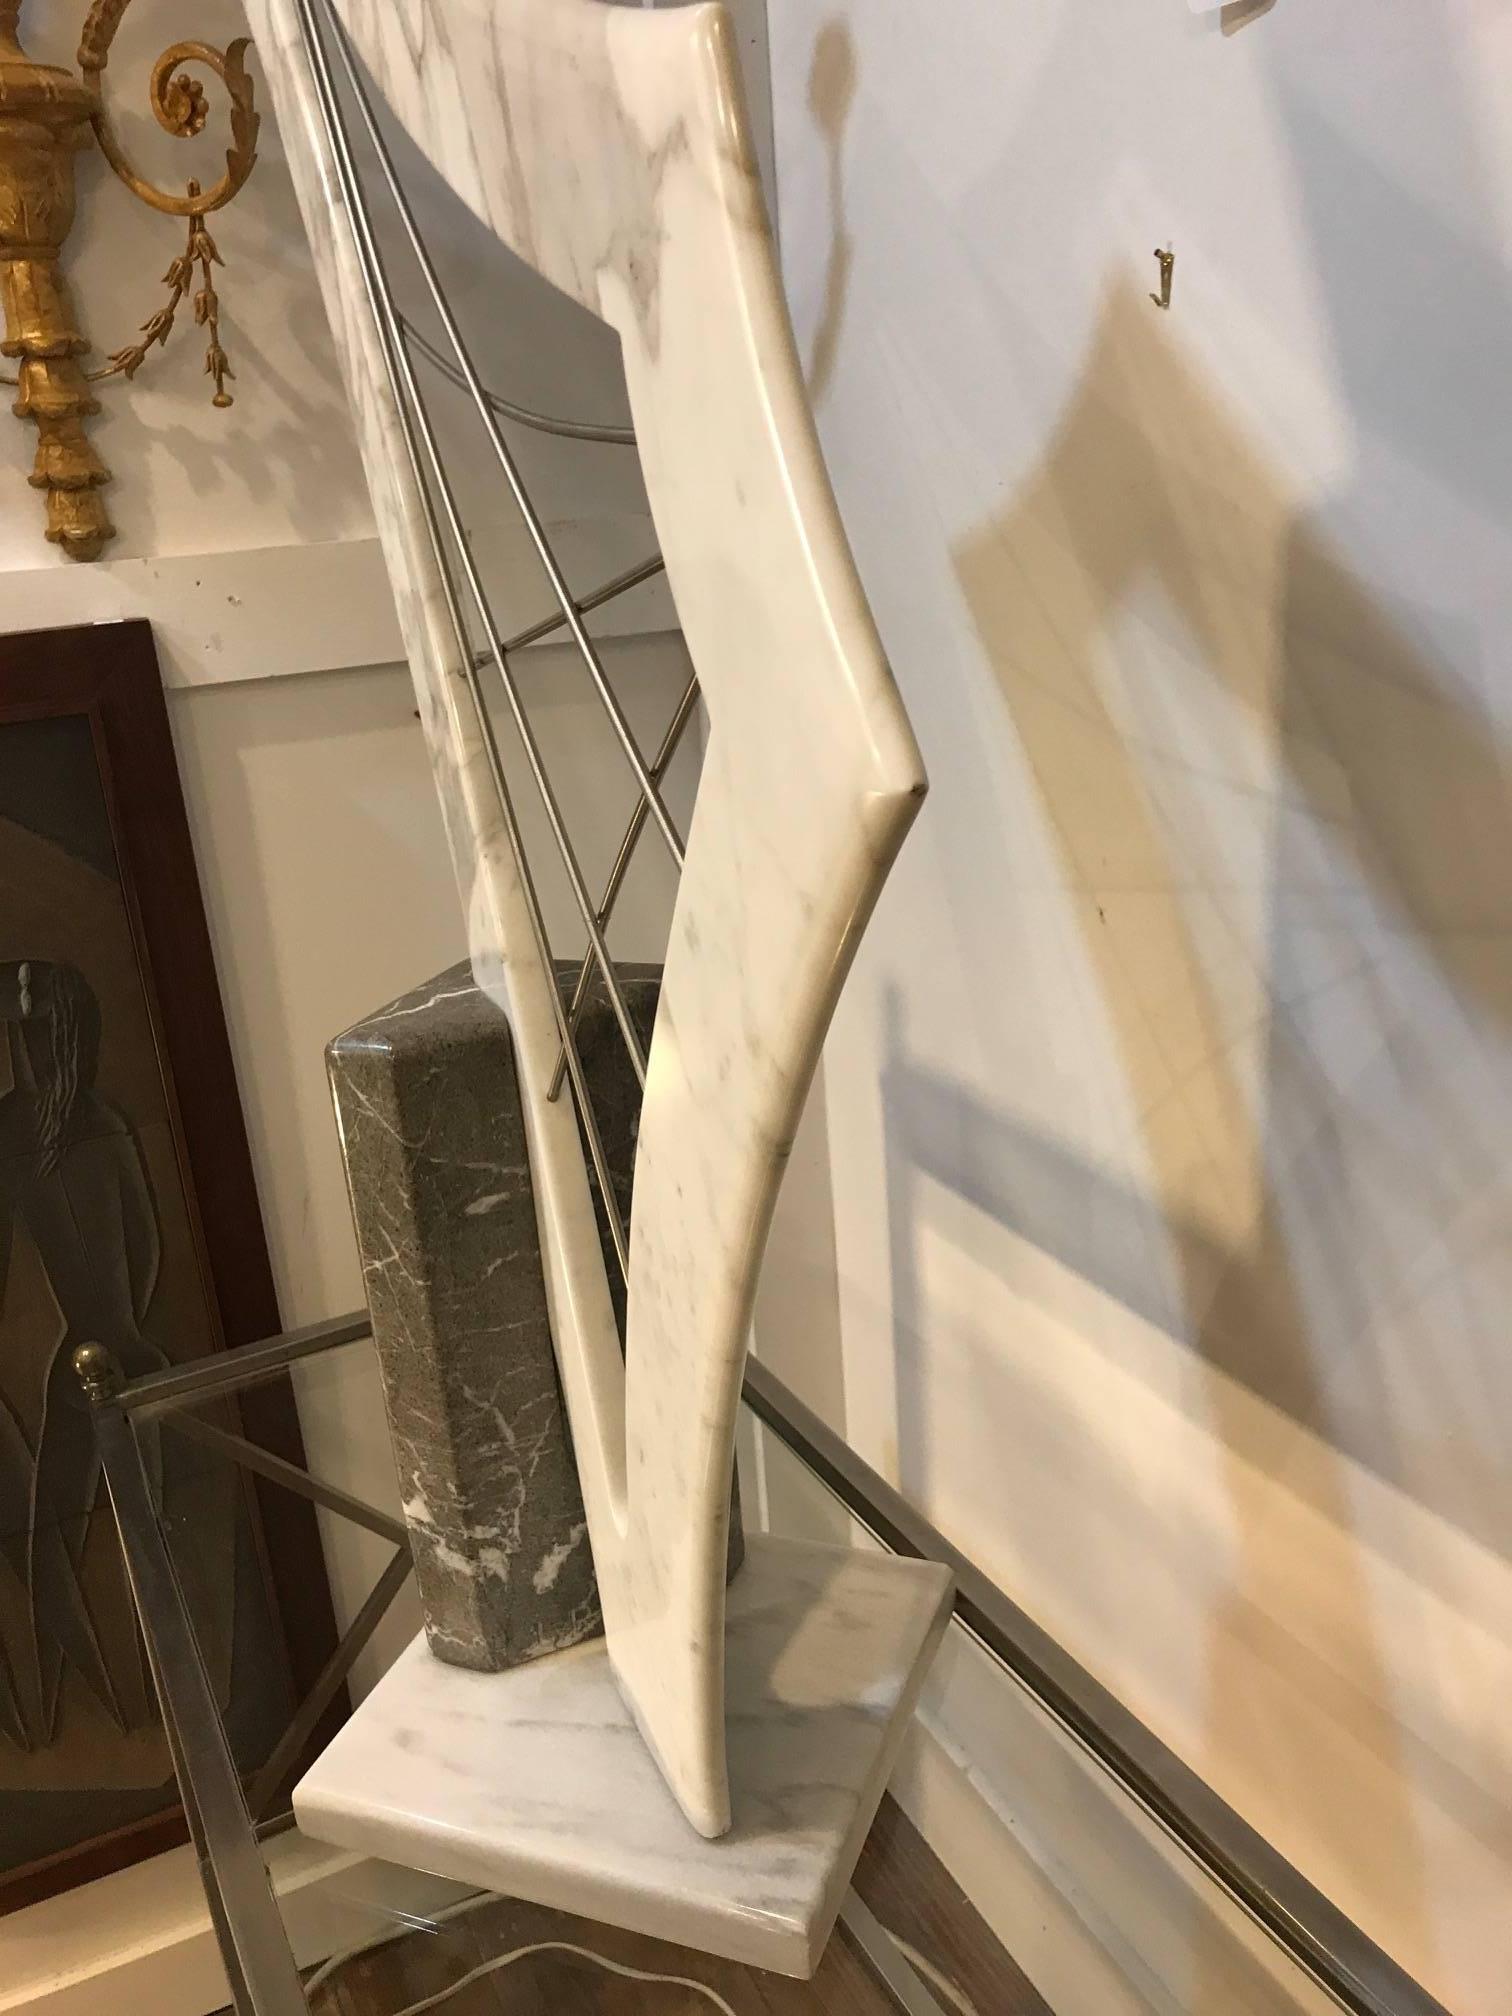 One of a kind artist signed marble sculpture in the form of a harp. The marble harp with steel rods forming the strings, signed L. Ritz 1989 on the black marble base.